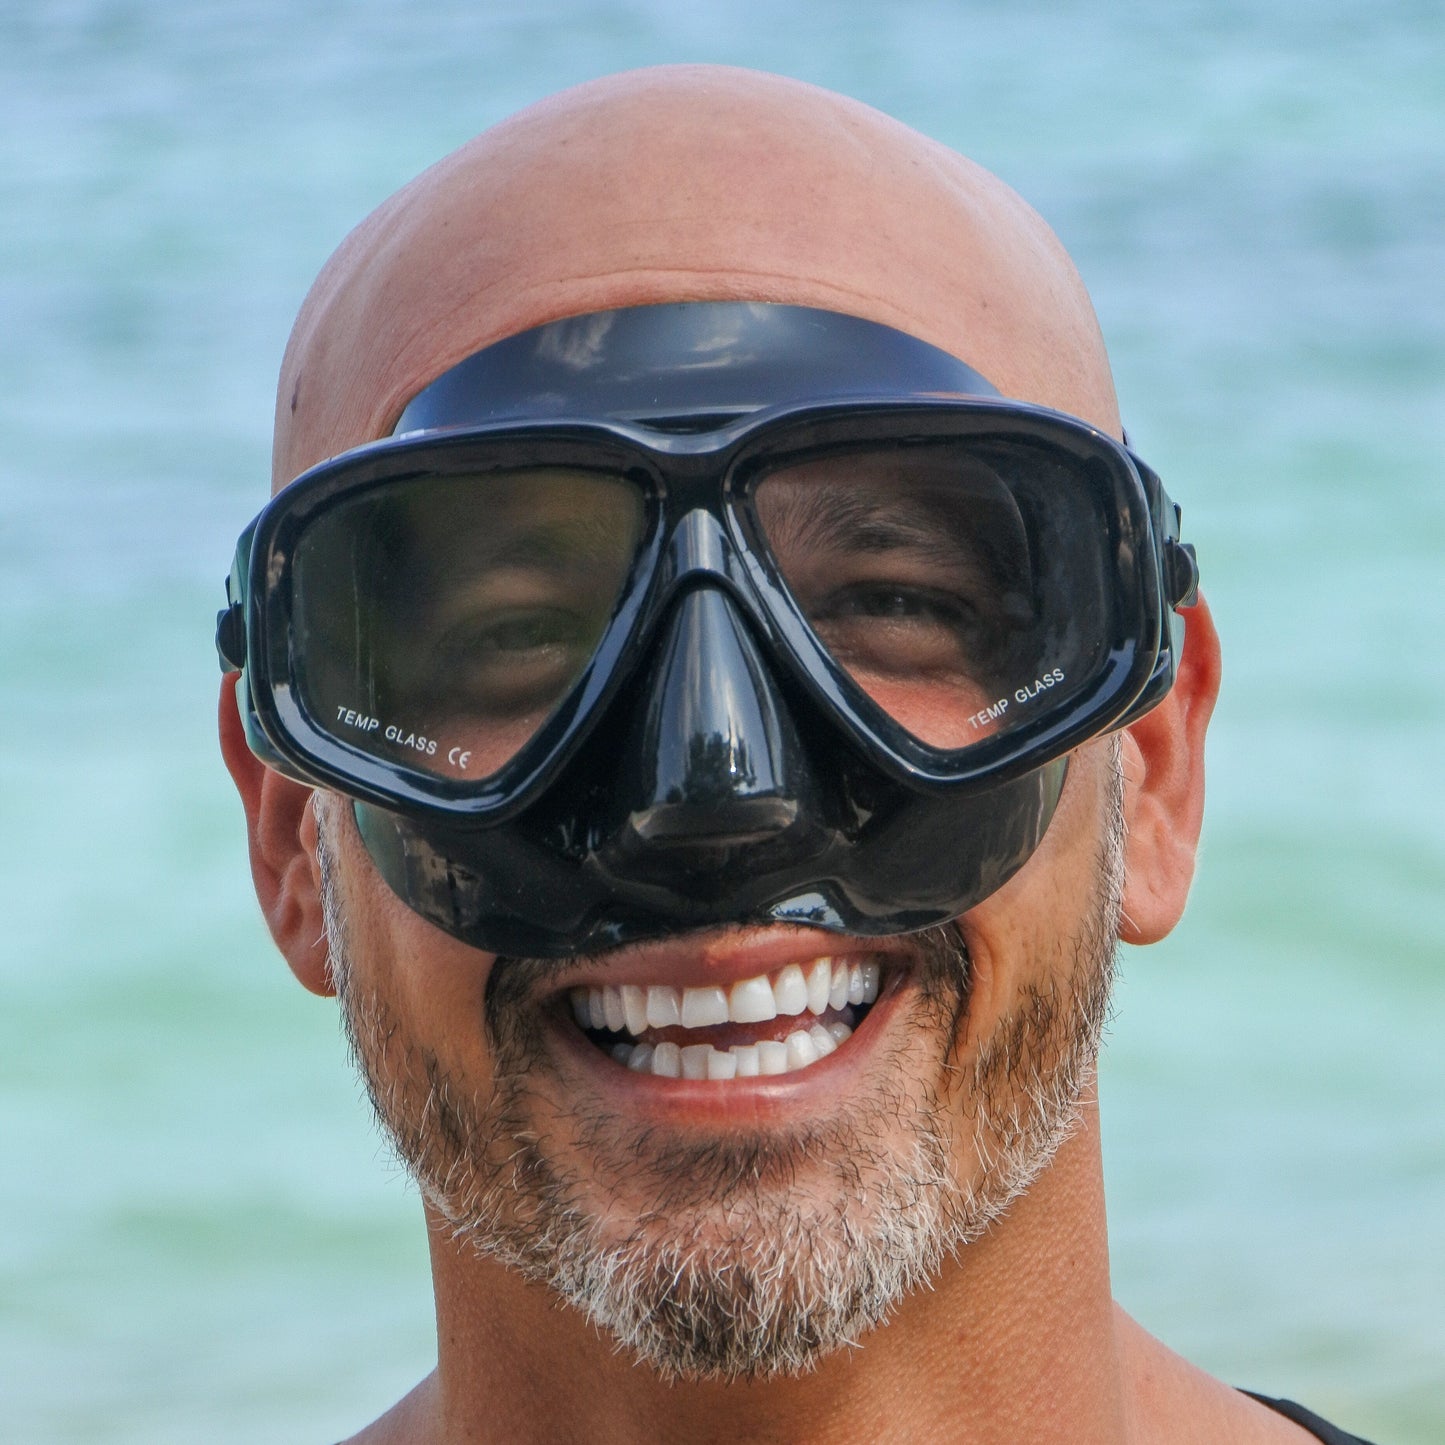 Prescription mask and snorkel set The RX Obsidian Set Different Strengths for Each Eye The RX Obsidion Prescription Mask for Snorkel & Scuba Diving